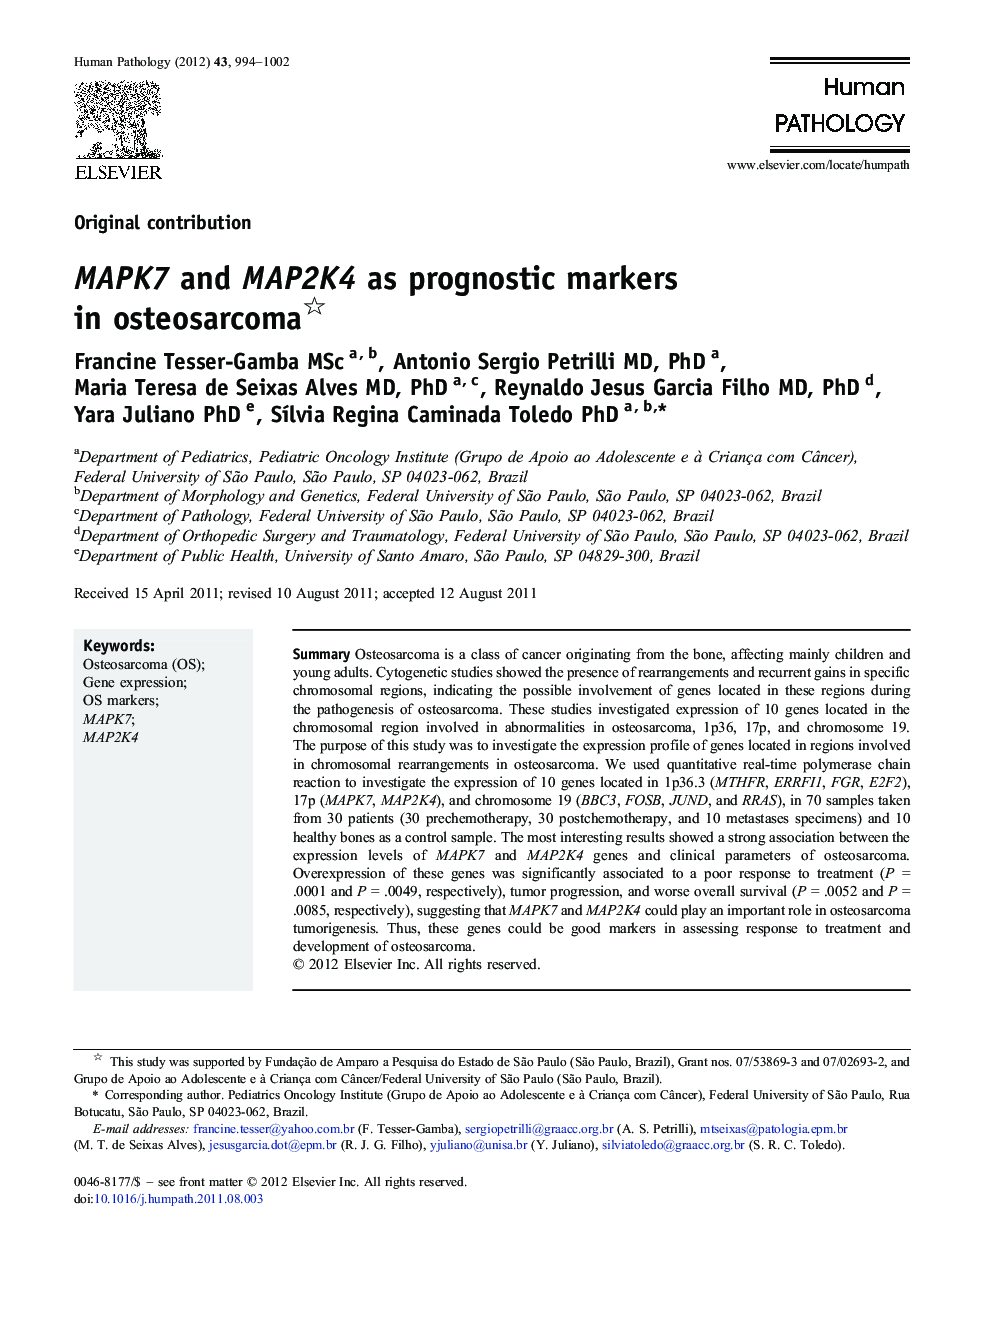 MAPK7 and MAP2K4 as prognostic markers in osteosarcoma 